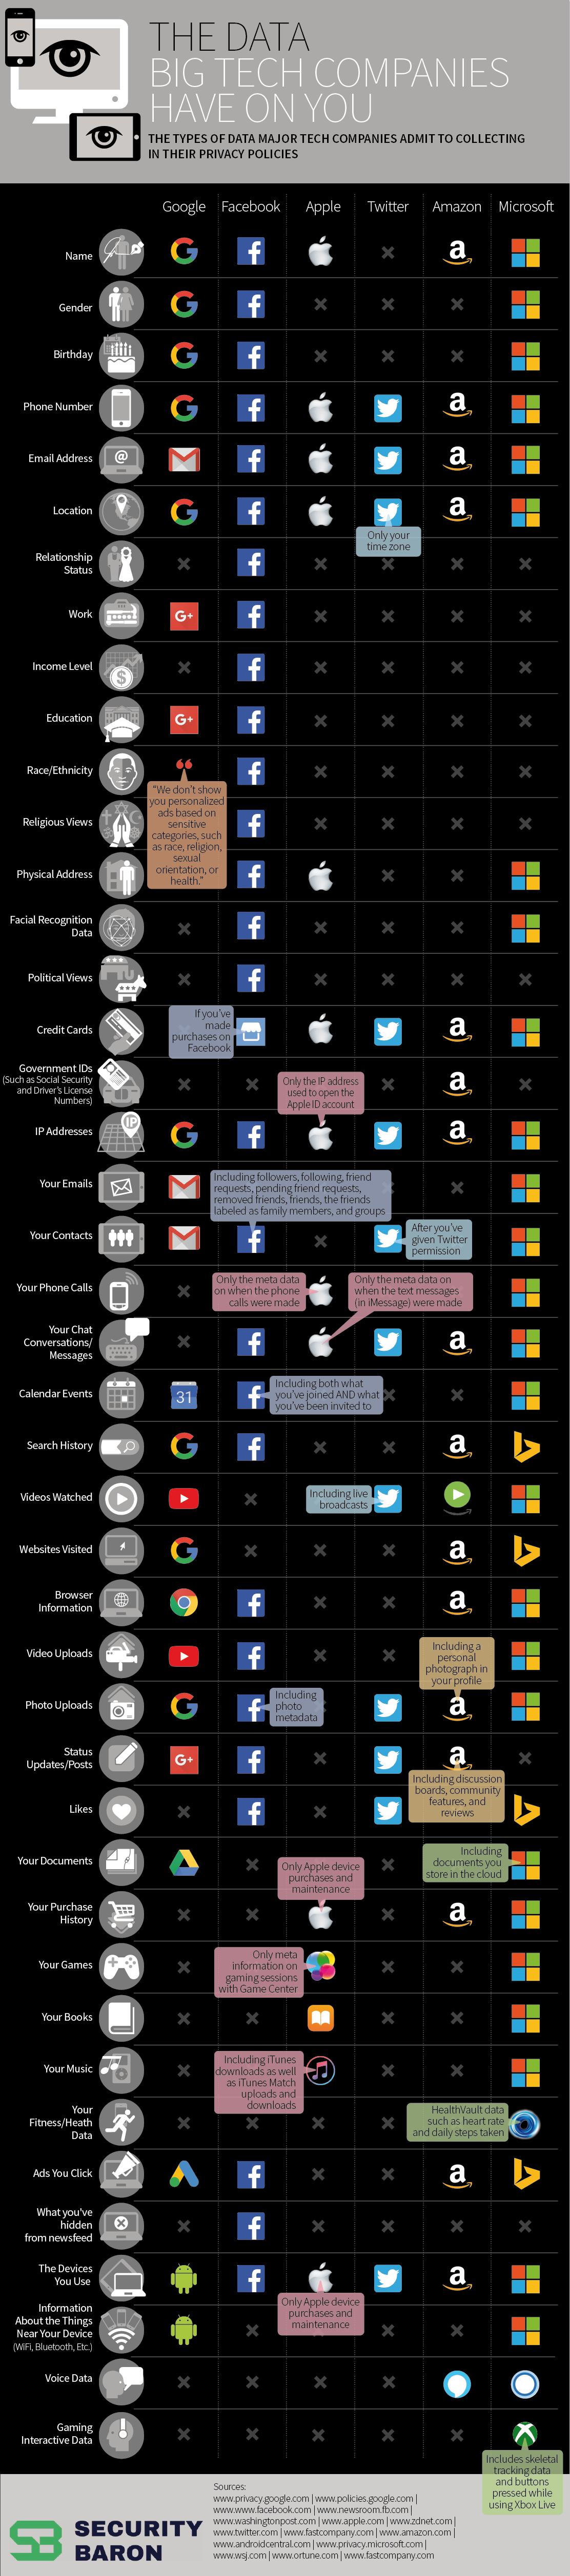 The data big tech companies have on you